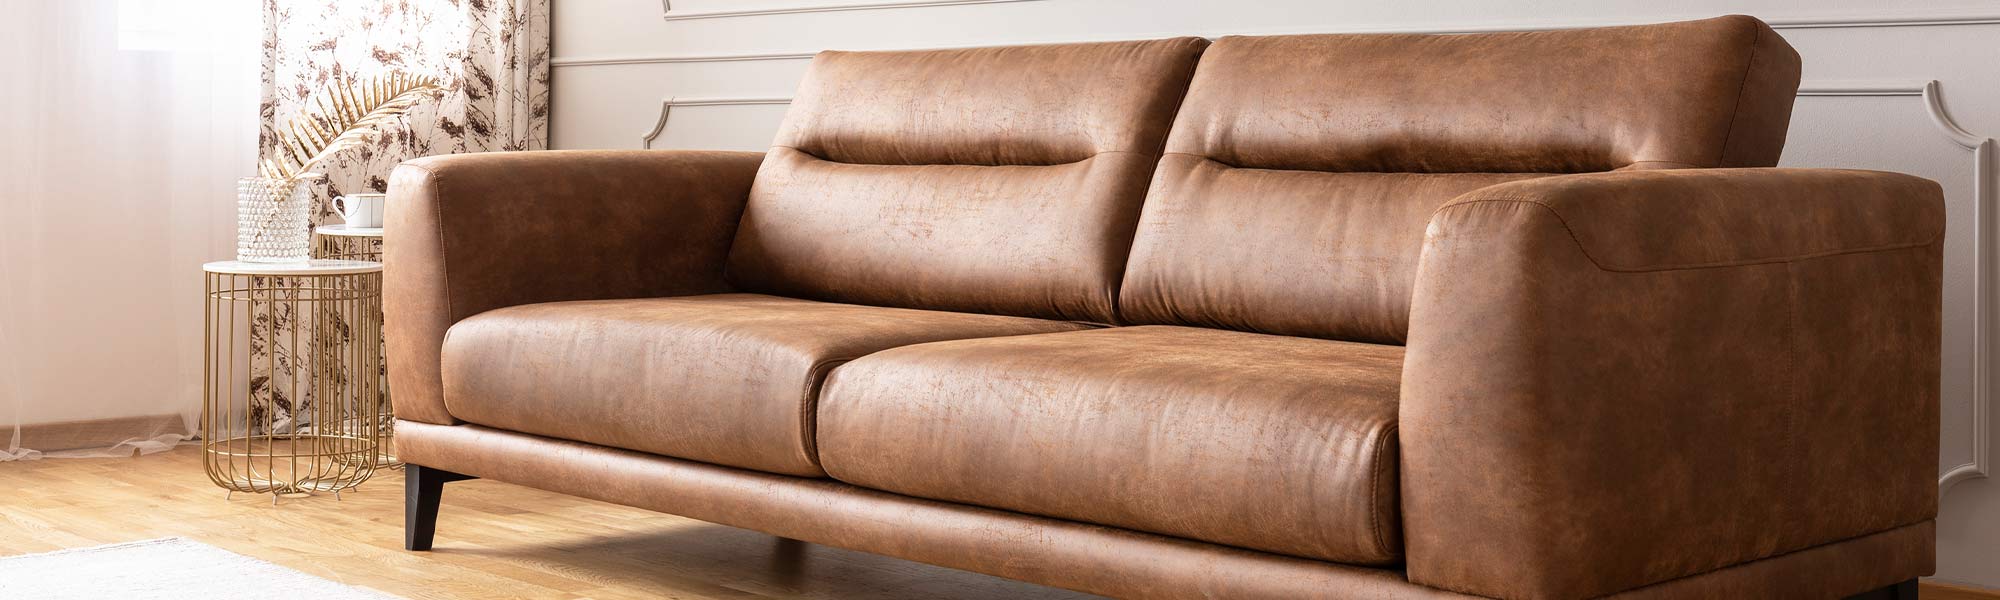 Leather Cleaning and Renewal Services in Chapel Hill and Durham